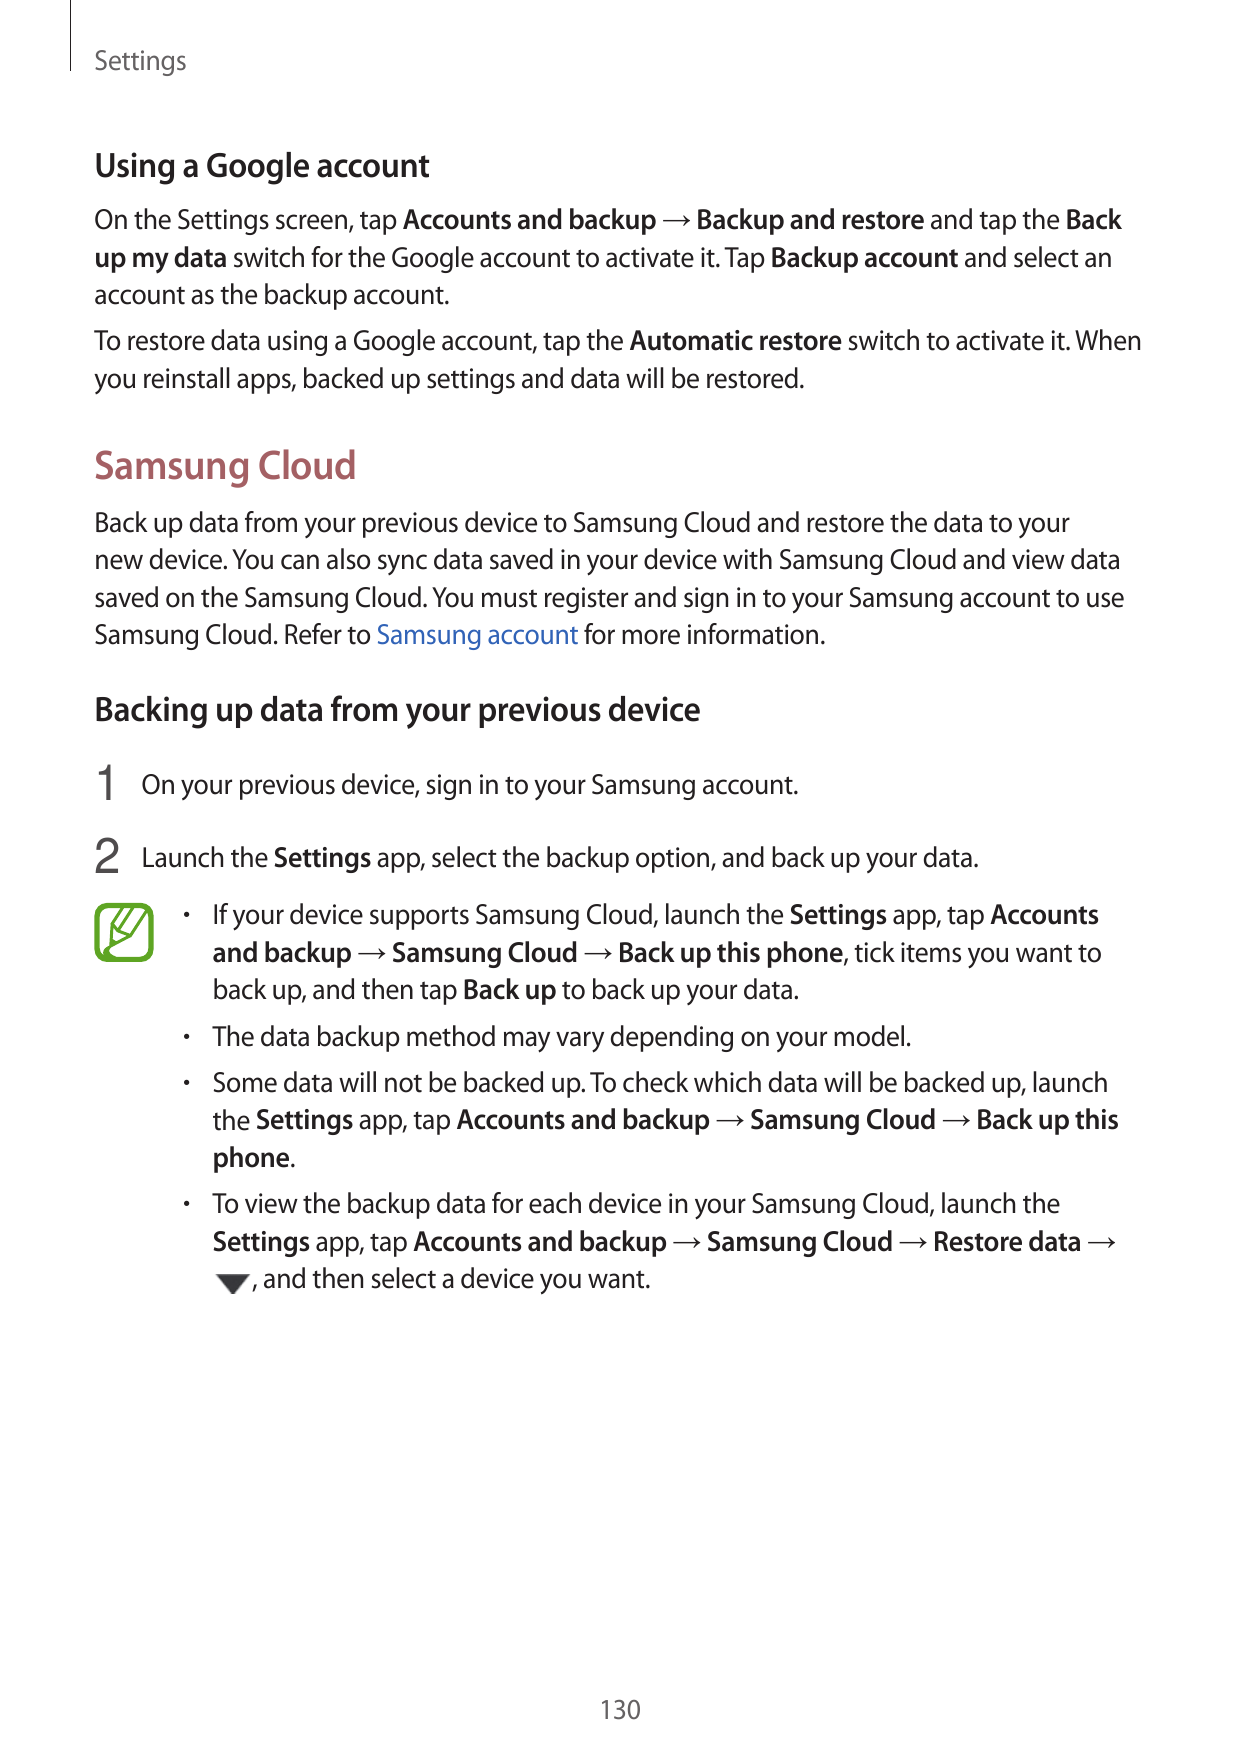 SettingsUsing a Google accountOn the Settings screen, tap Accounts and backup → Backup and restore and tap the Backup my data sw